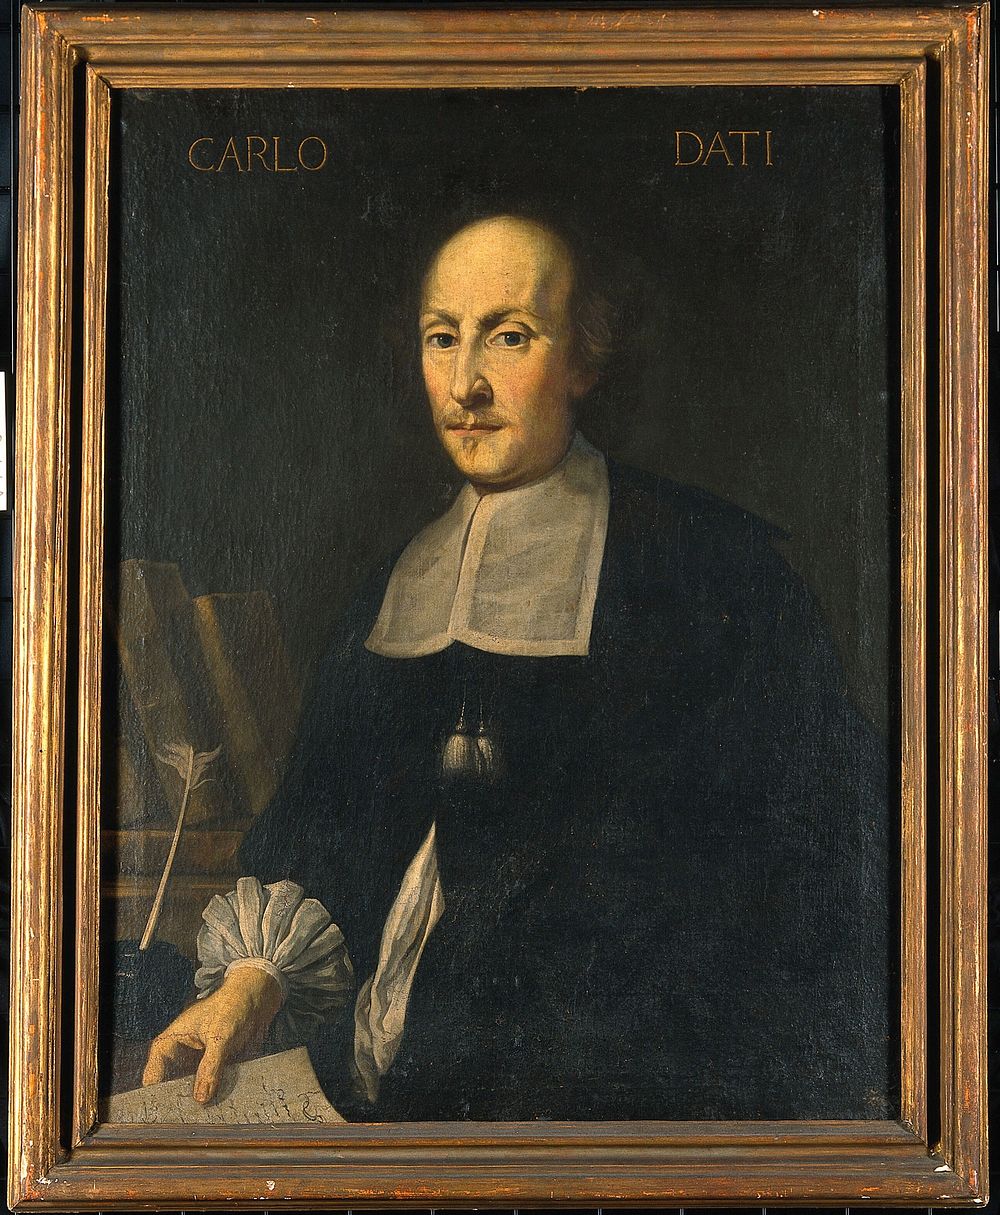 Carlo Dati. Oil painting by a Florentine painter, 18th  century.